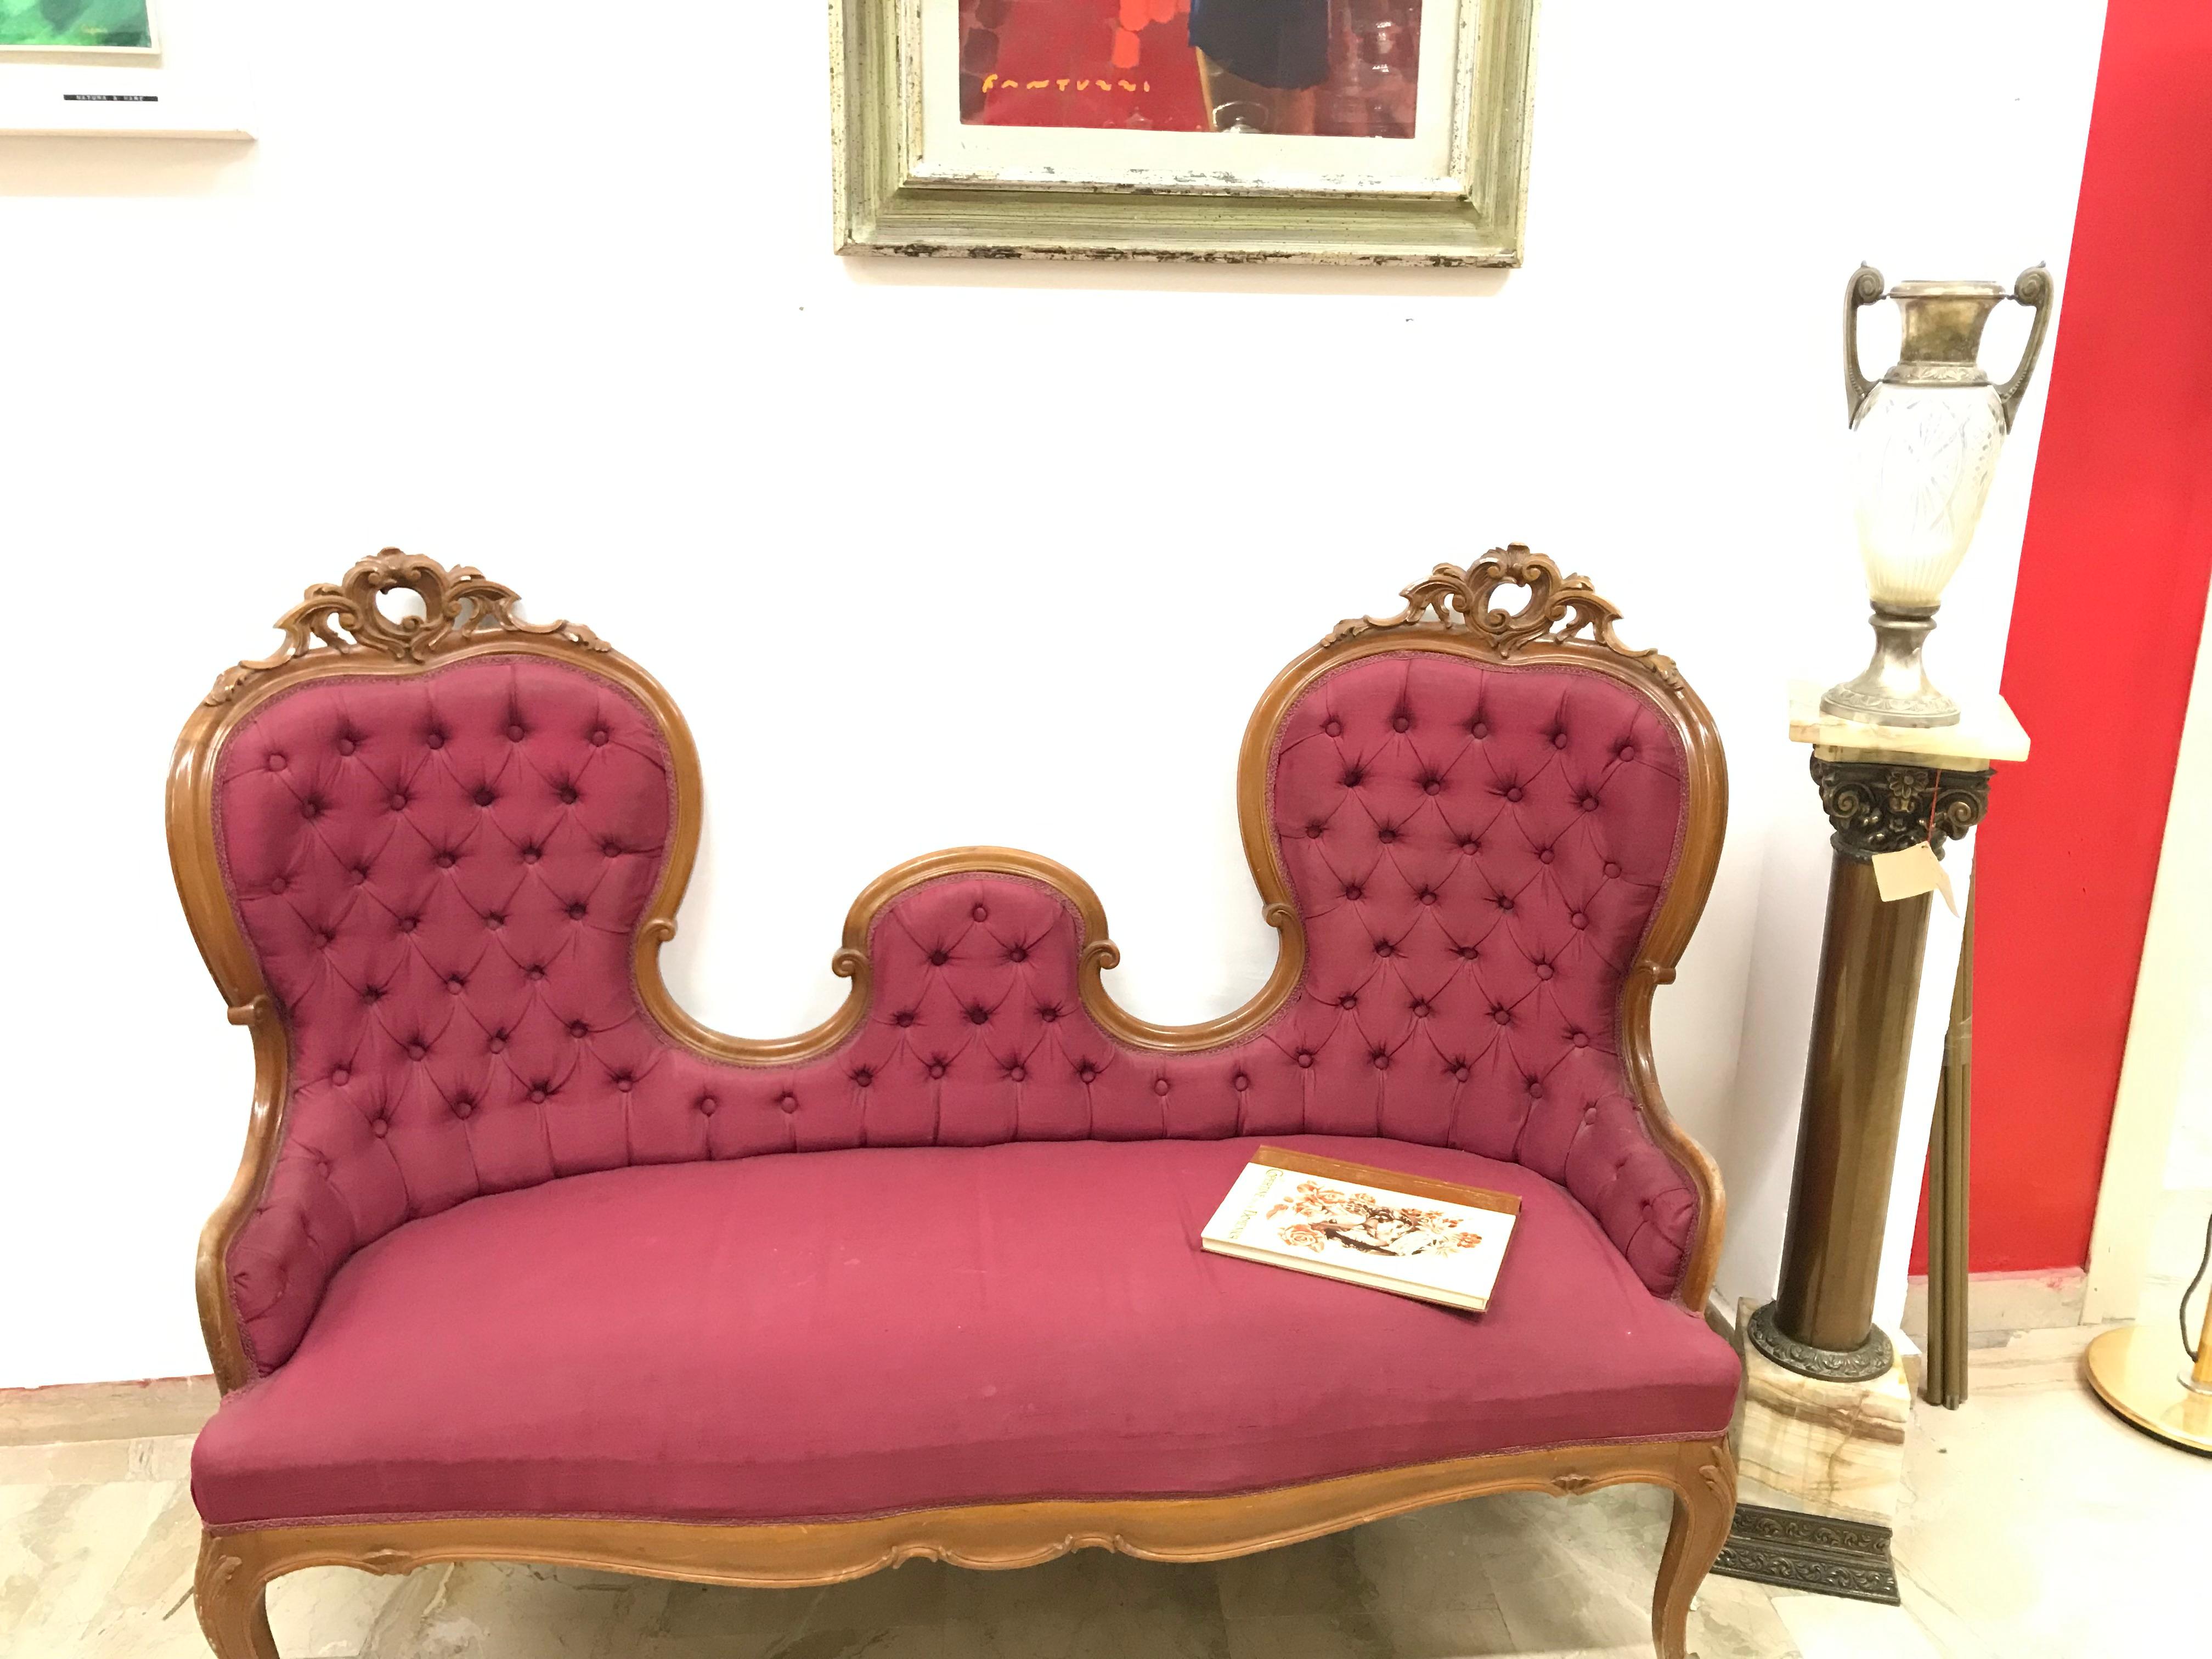 Comfortable Louis Philippe style three-seat sofa with wooden frame.
The upholstery is in burgundy fabric with a quilted back that gives it an extra touch of elegance.
Foam padding
The lining is finished in rope.
In good condition with some small